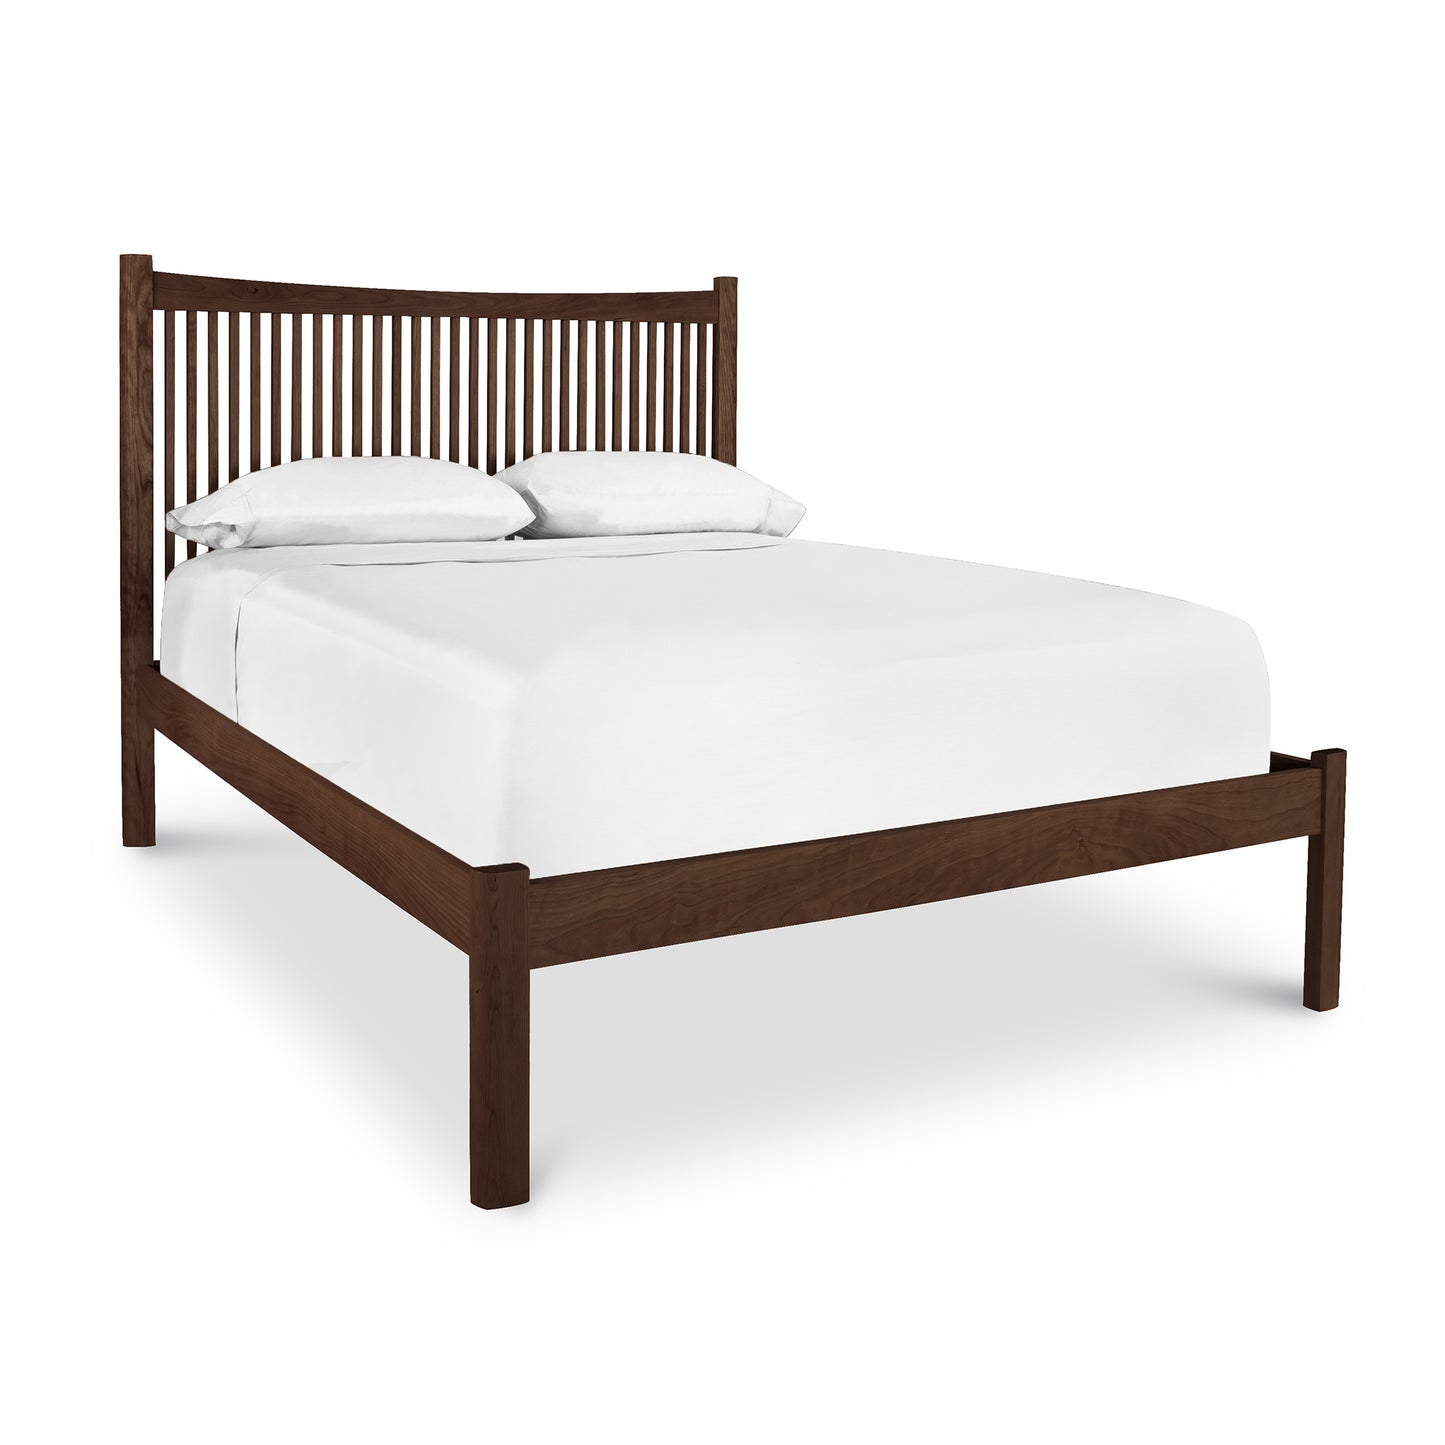 A Heartwood Shaker Low Footboard Bed frame featuring a slatted headboard and a footboard, dressed with white bedding and two pillows, against a white background.